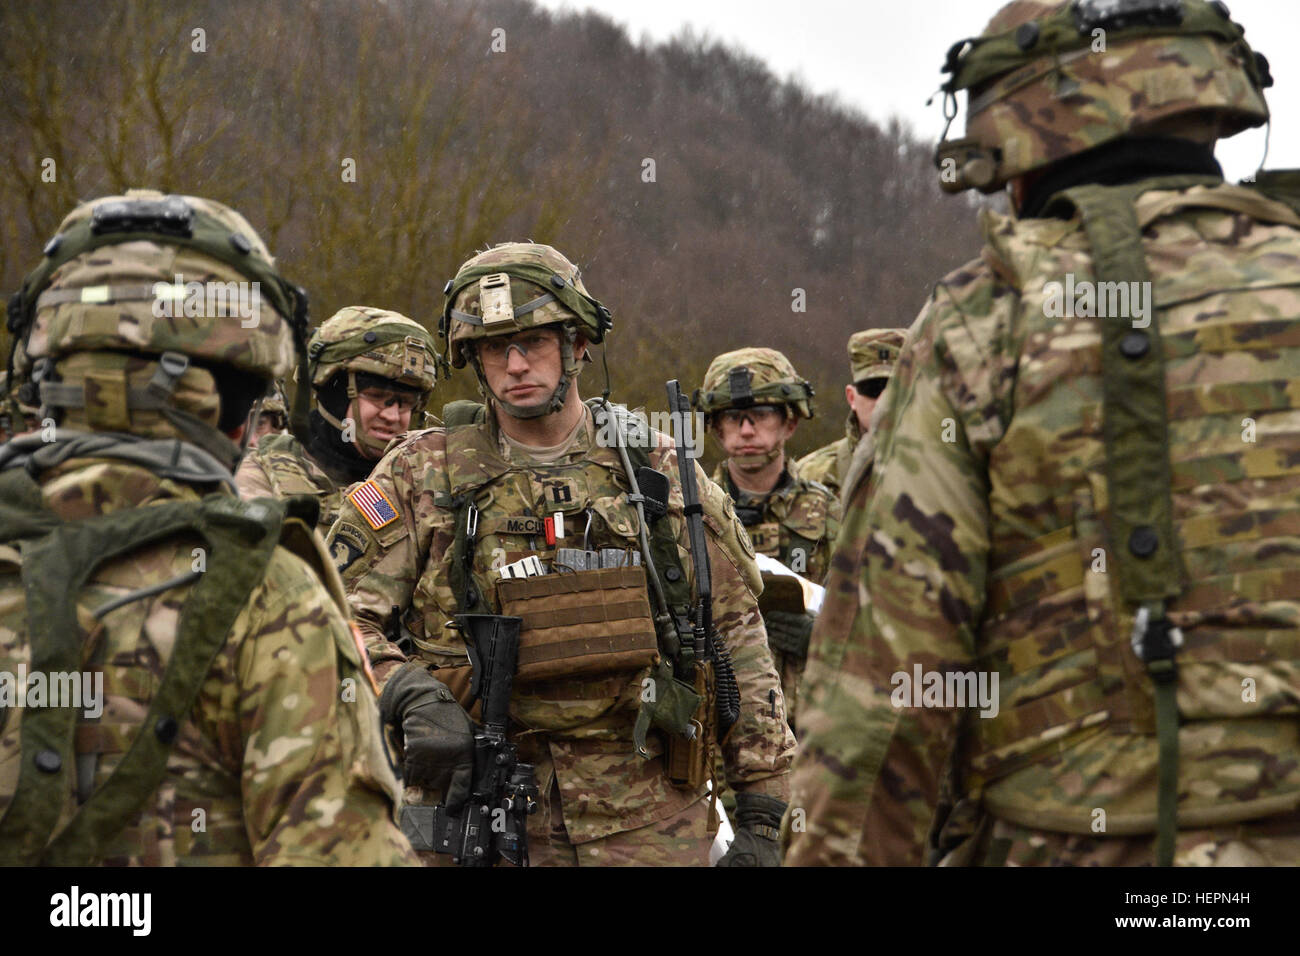 Troopers and leaders assigned to 2nd Squadron (Cougars), 2nd Cavalry Regiment, listen as Lt. Col. Steven E. Gventer,  2nd Squadron Commander, points out the unit's position on a terrain map during a Combined Arms Rehearsal while participating in Exercise Allied Spirit IV, being held at the Joint Multinational Readiness Center located in Hohenfels, Germany, Jan. 28, 2016. The goal of the exercise is to prepare forces, in Europe, to operate together by exercising tactical interoperability and testing secure communications within NATO Alliance members and partner nations. (U.S. Army photo by Sgt. Stock Photo